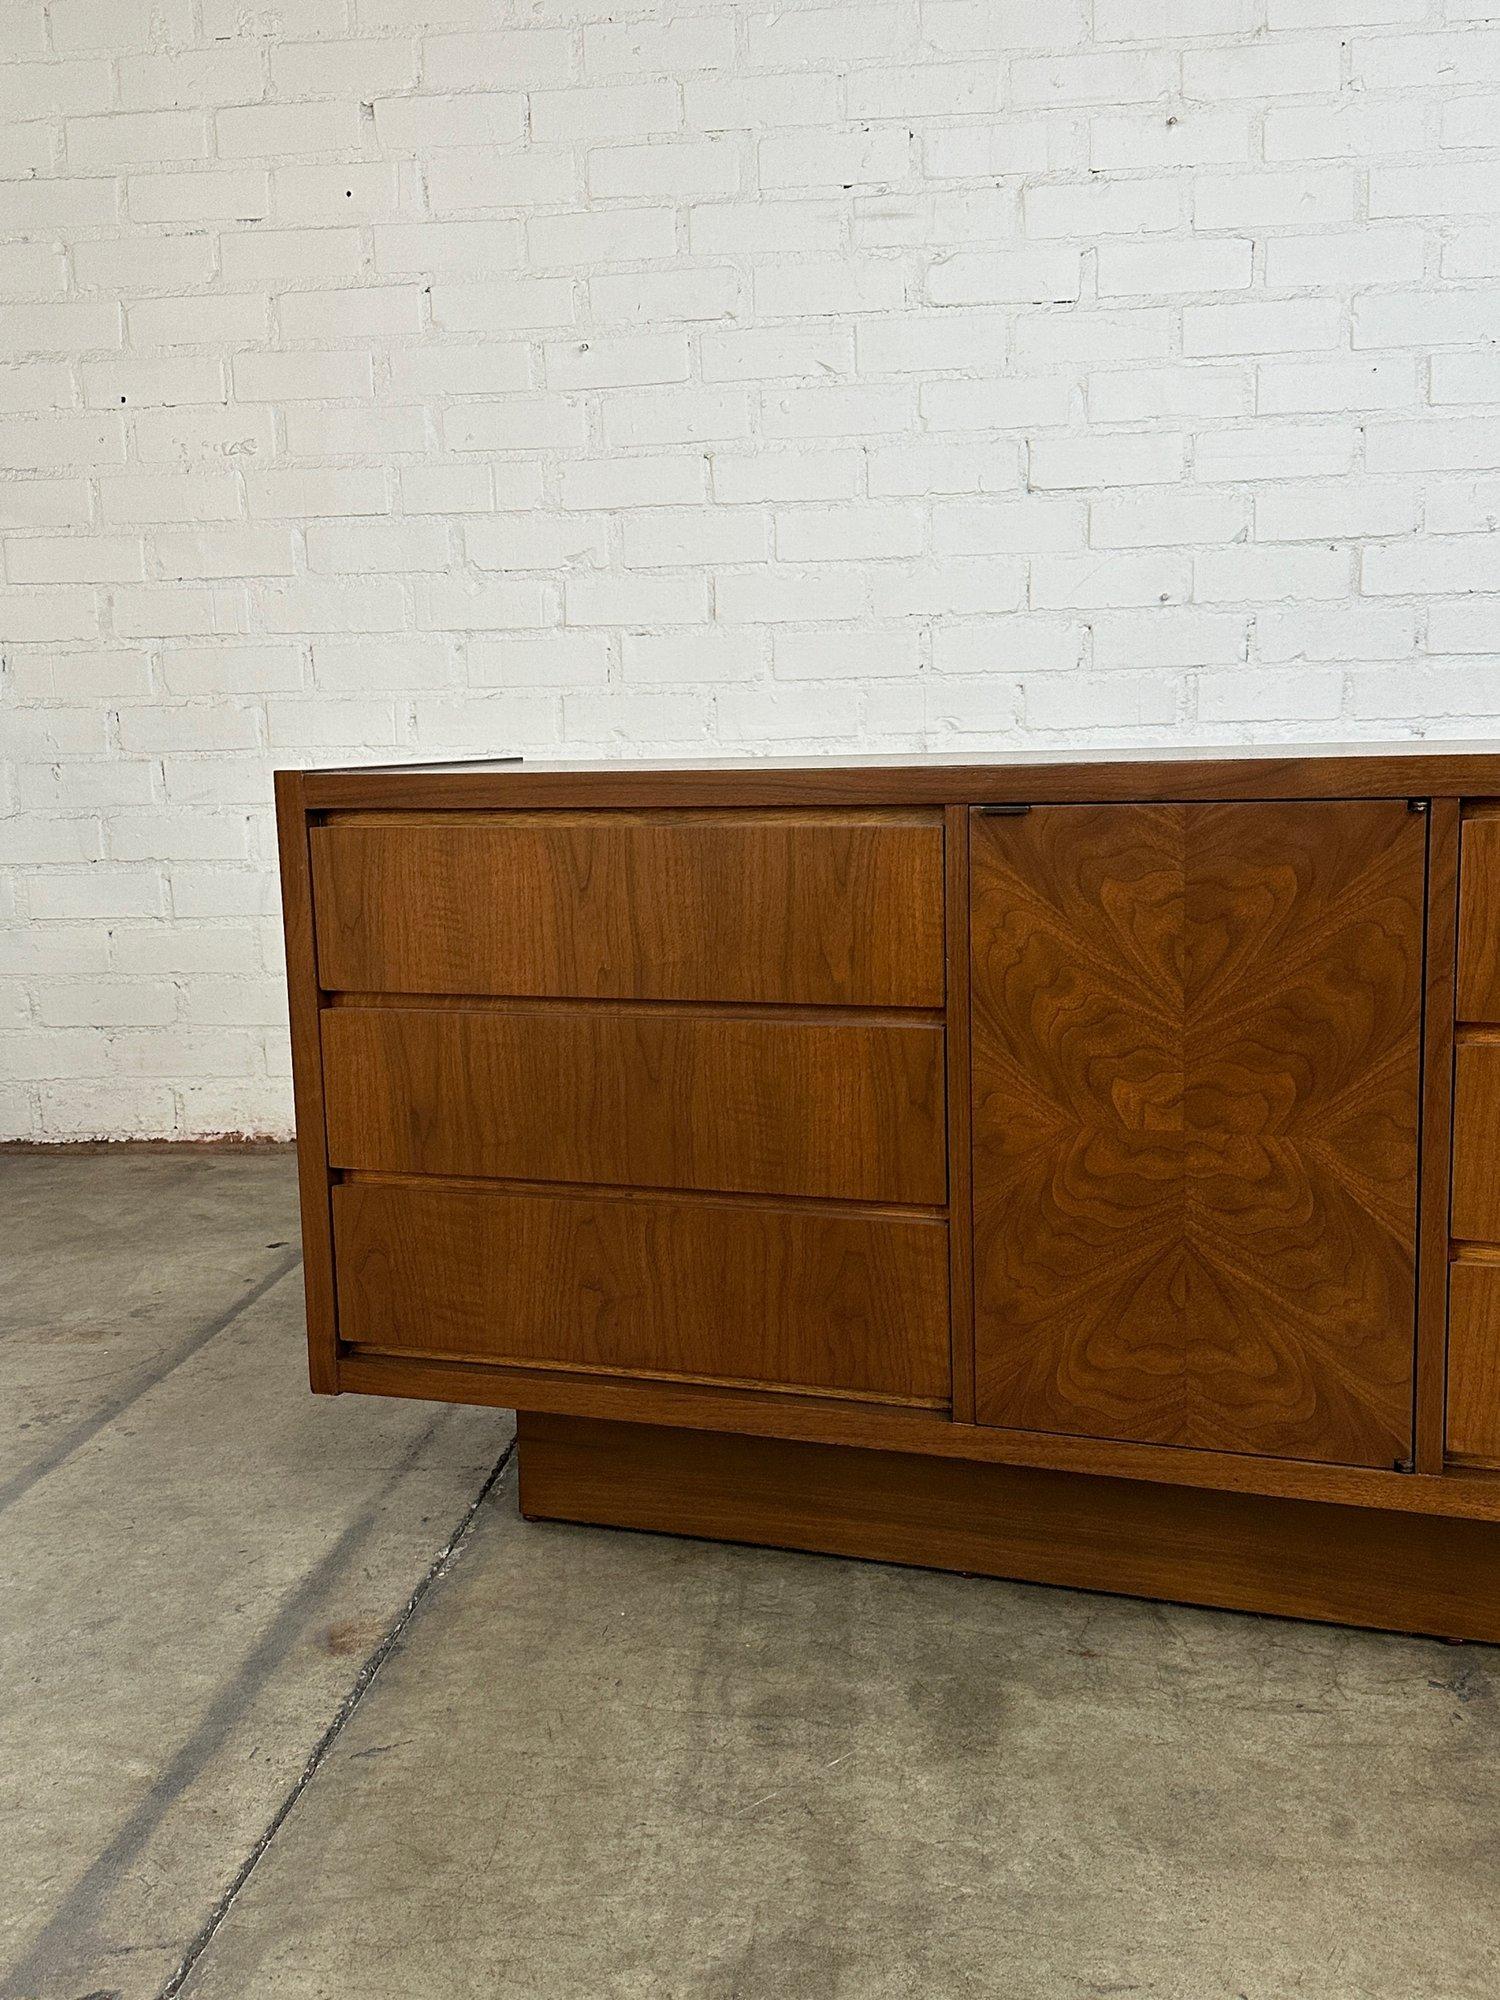 W66 D18 H29

Fully restored credenza with six smooth sliding drawers with under drawer pulls and open storage behind the starburst door panel. Shelf inside is stationary and can handle heavy weight. Item sits on a recessed walnut plinth base.